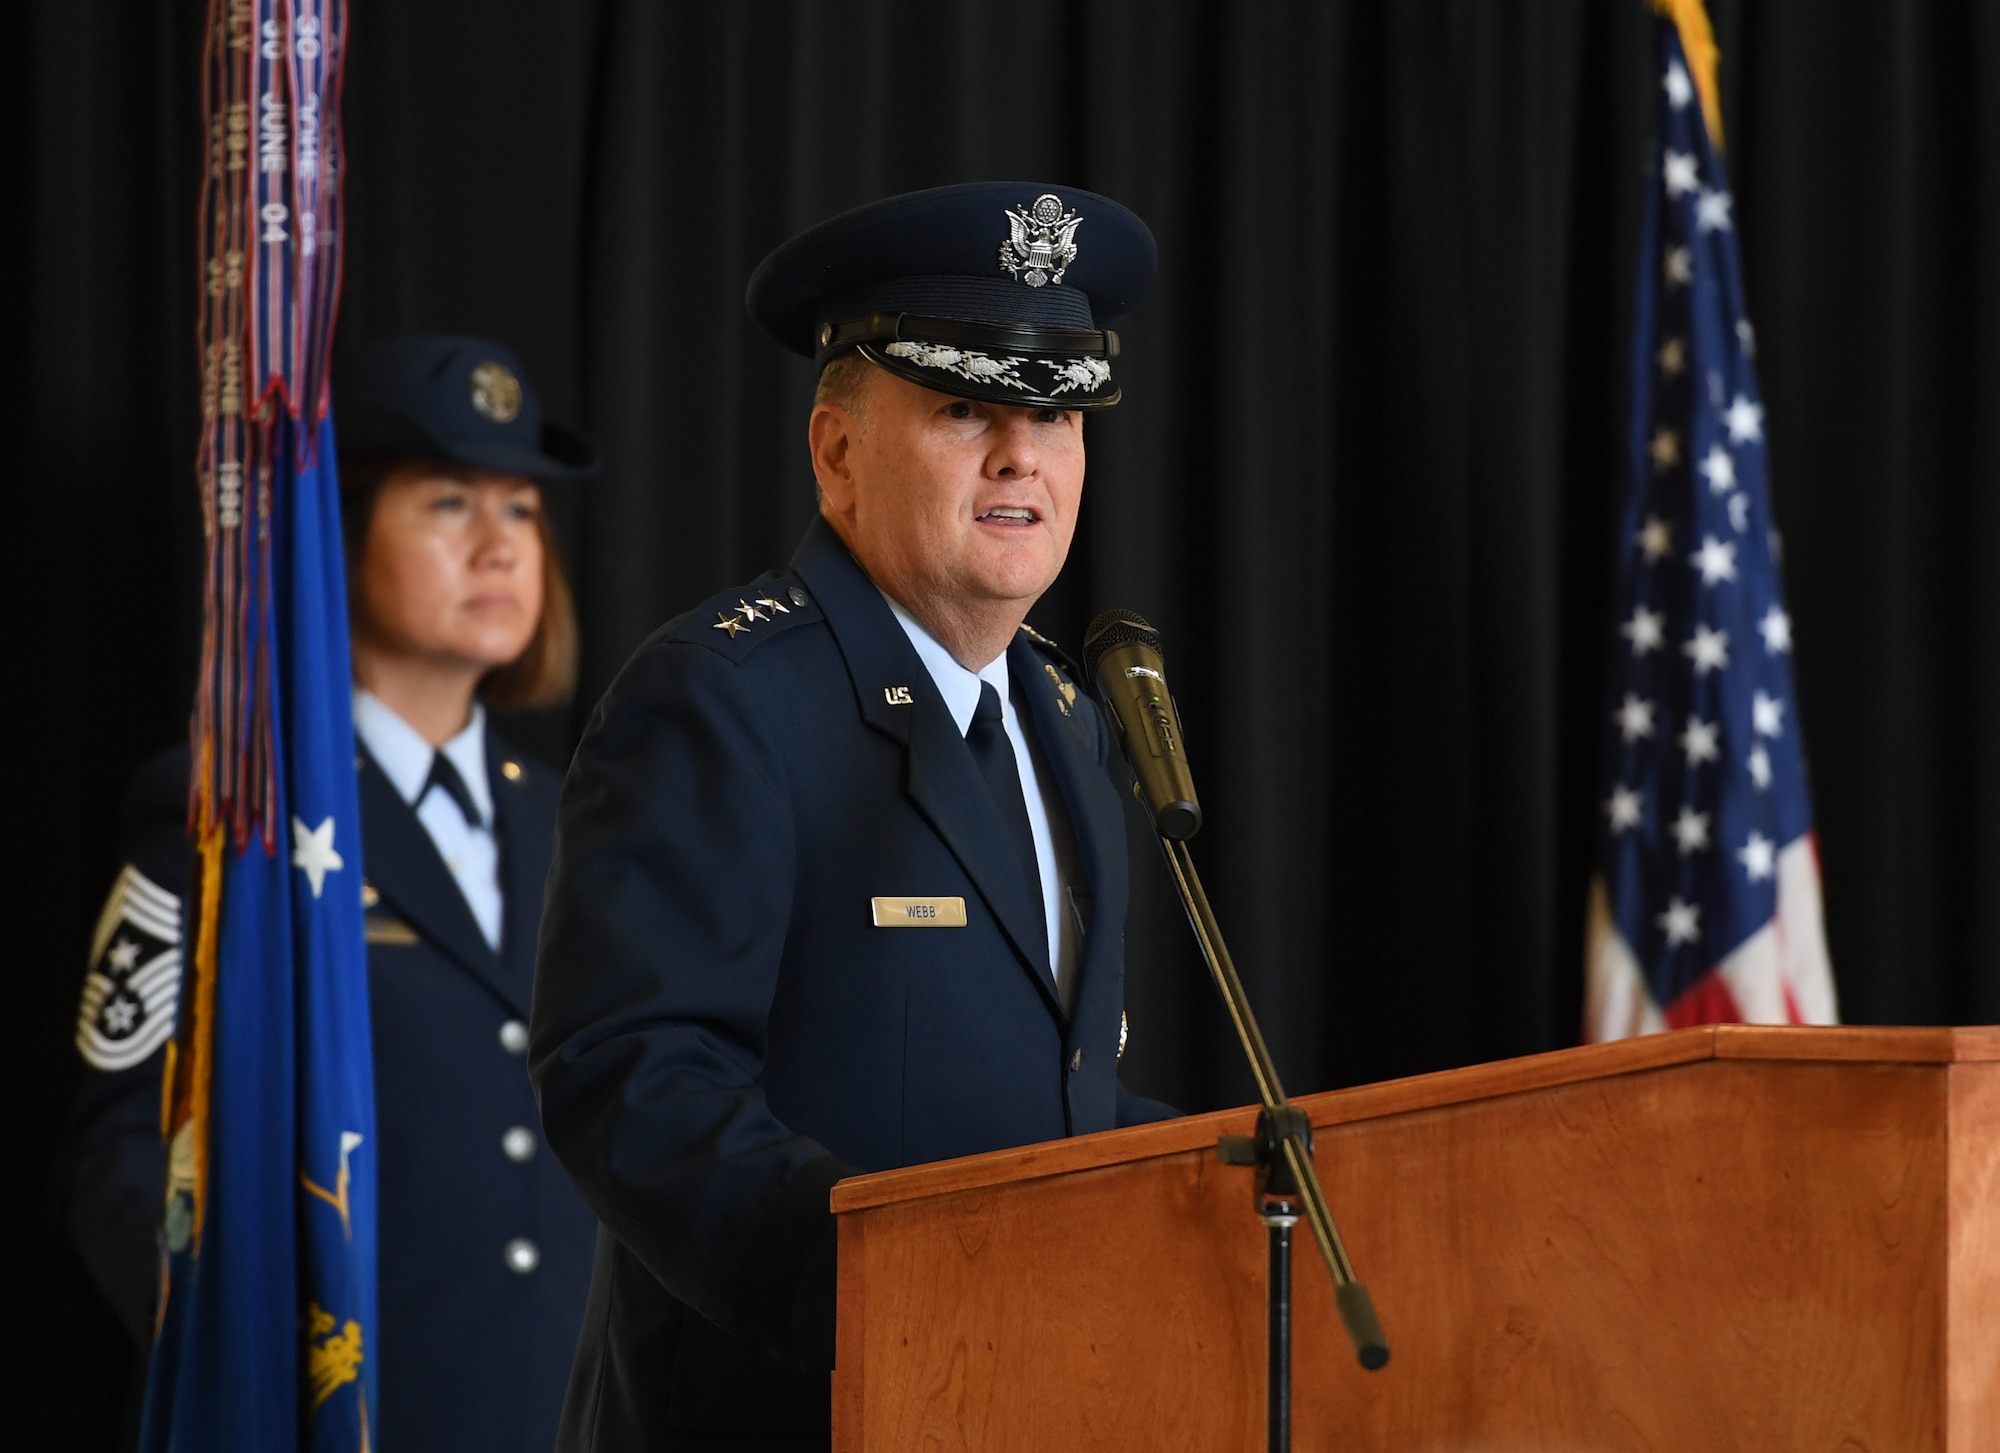 U.S. Air Force Lt. Gen. Brad Webb, commander of Air Education and Training Command, delivers remarks during the Second Air Force change of command ceremony on Keesler Air Force Base,
Mississippi, Aug. 29, 2019. The ceremony is a symbol of command being exchanged from one commander to the next. Maj. Gen. Andrea Tullos assumed command of the Second Air Force from Maj. Gen. Timothy Leahy. (U.S. Air Force photo by Kemberly Groue)